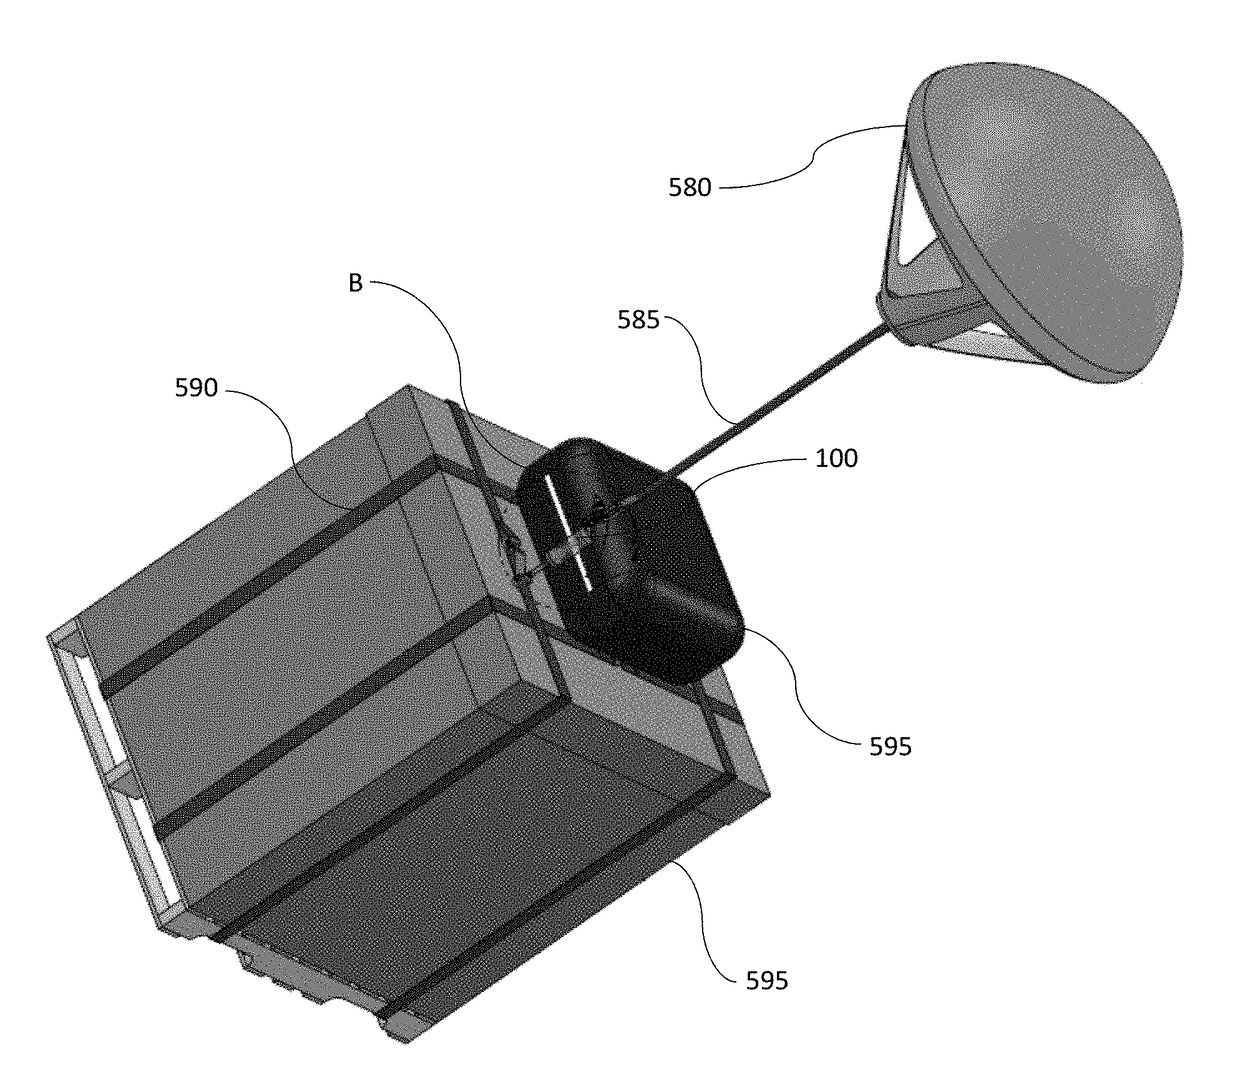 Time delay device for parachute deployment